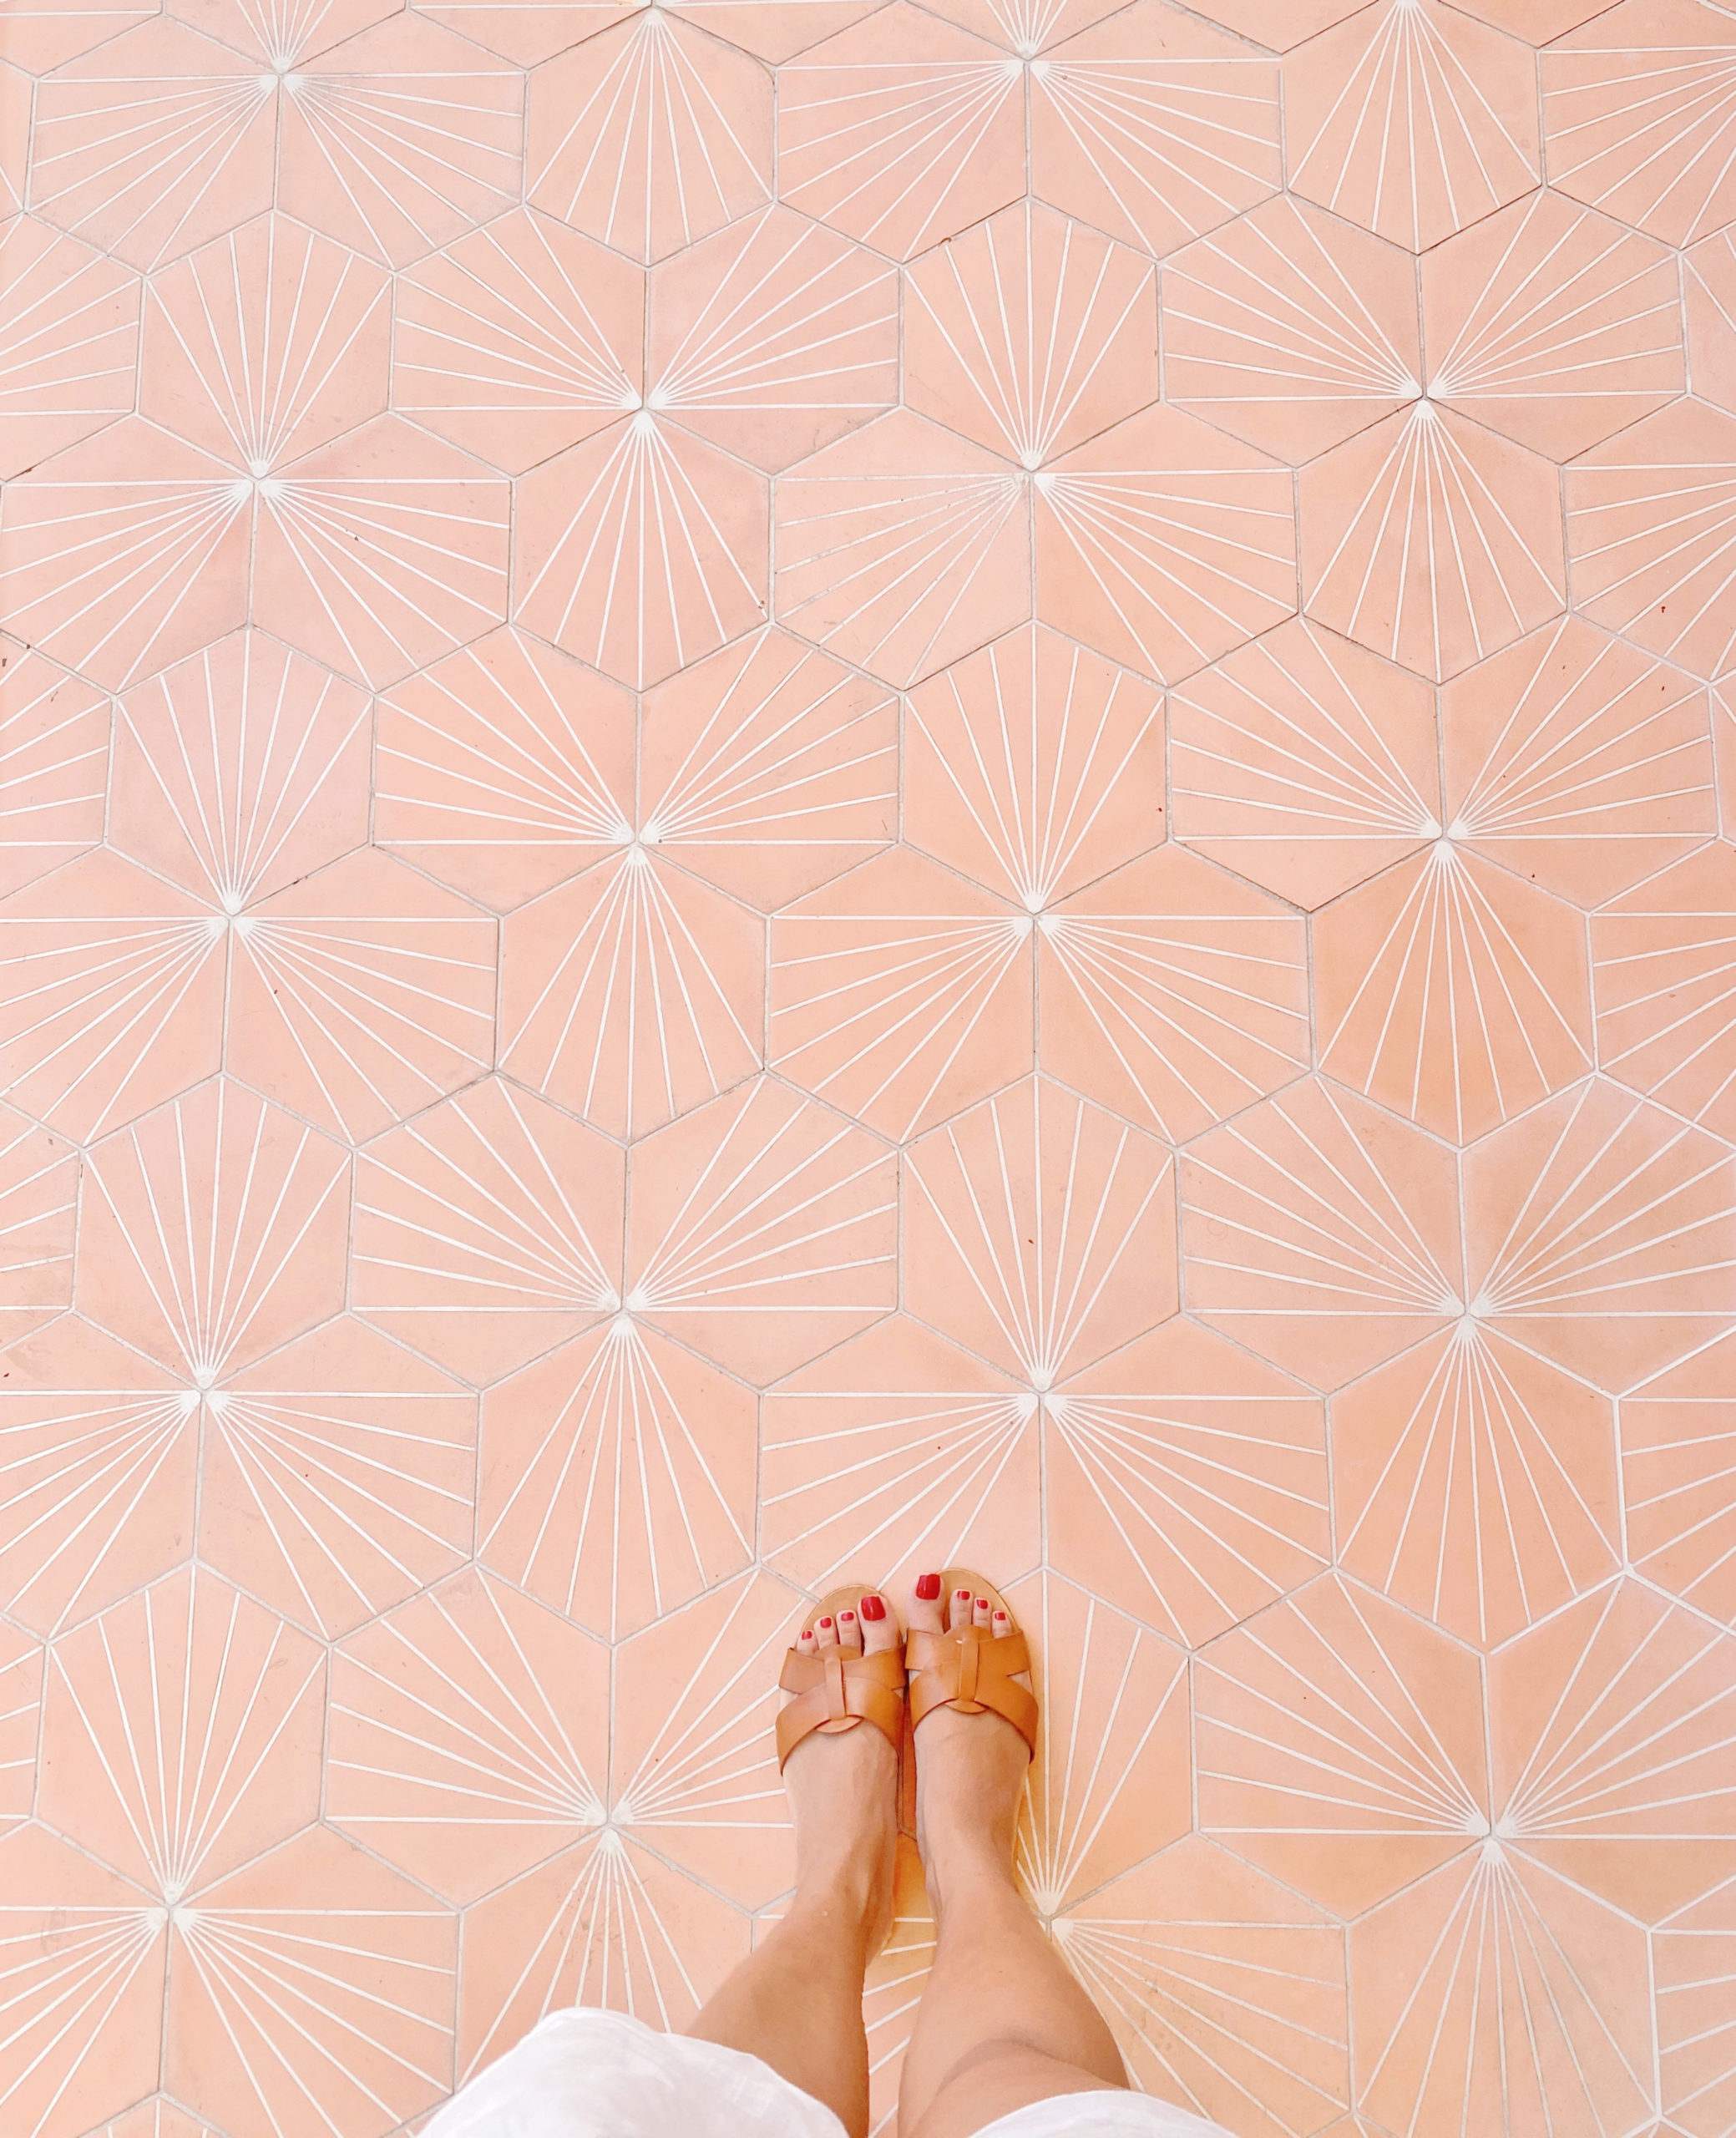 Wes Anderson meets Art Deco by Hopeful Outsiders. Pastel Tiles 